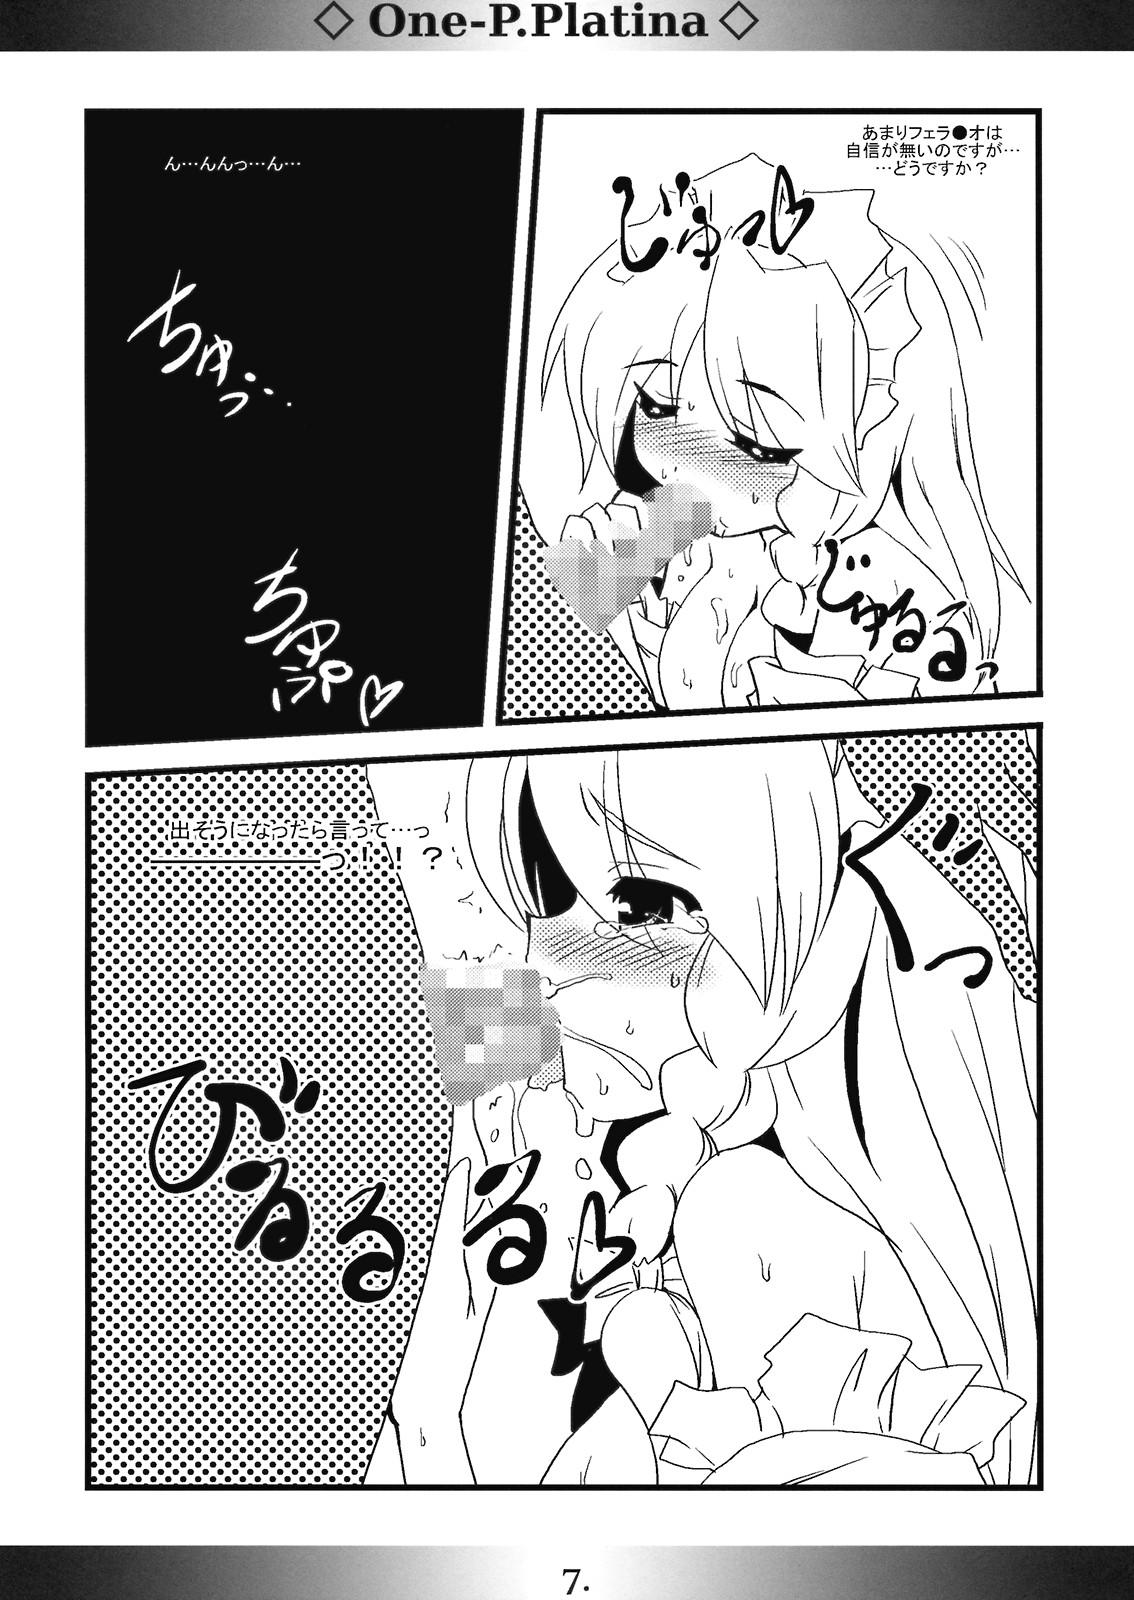 Trap One-P.Platina - Touhou project Porn Star - Page 7